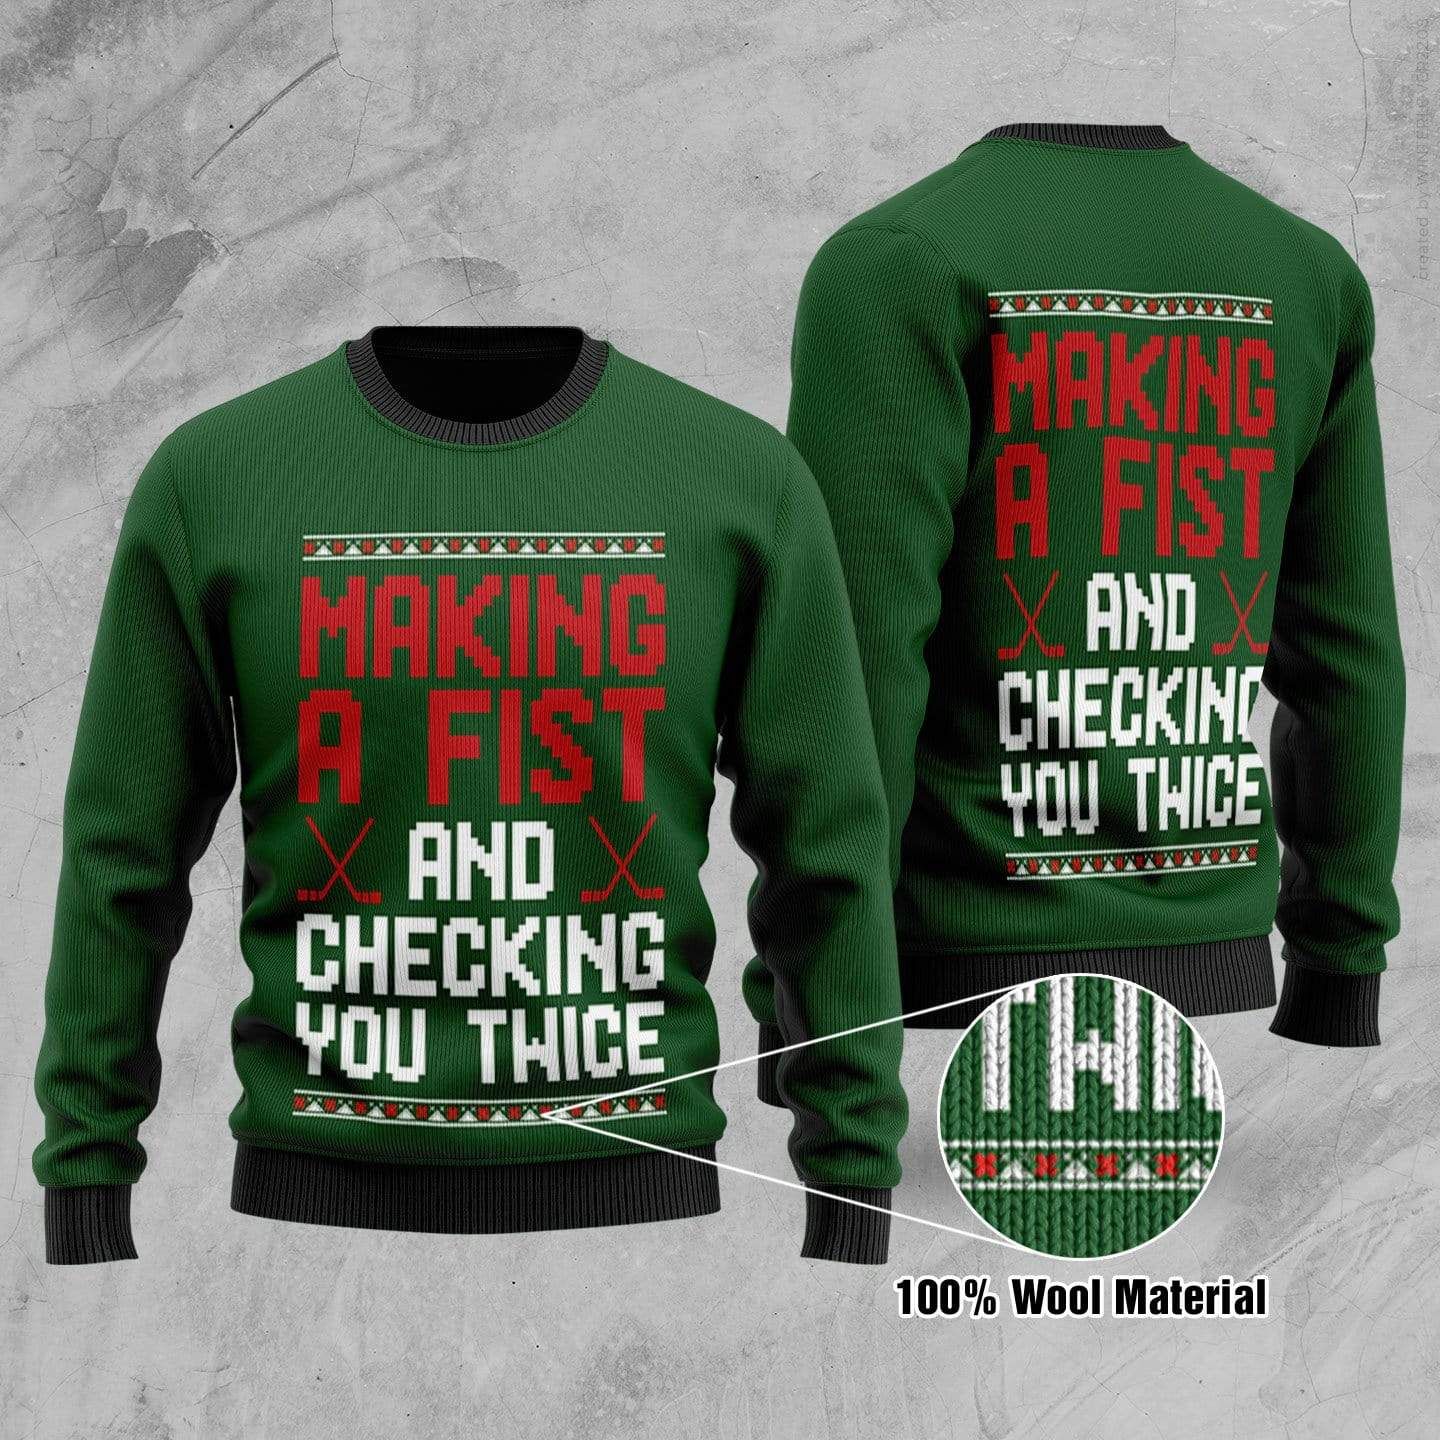 Hockey Making A Fist And Checking Your Twice Sweater